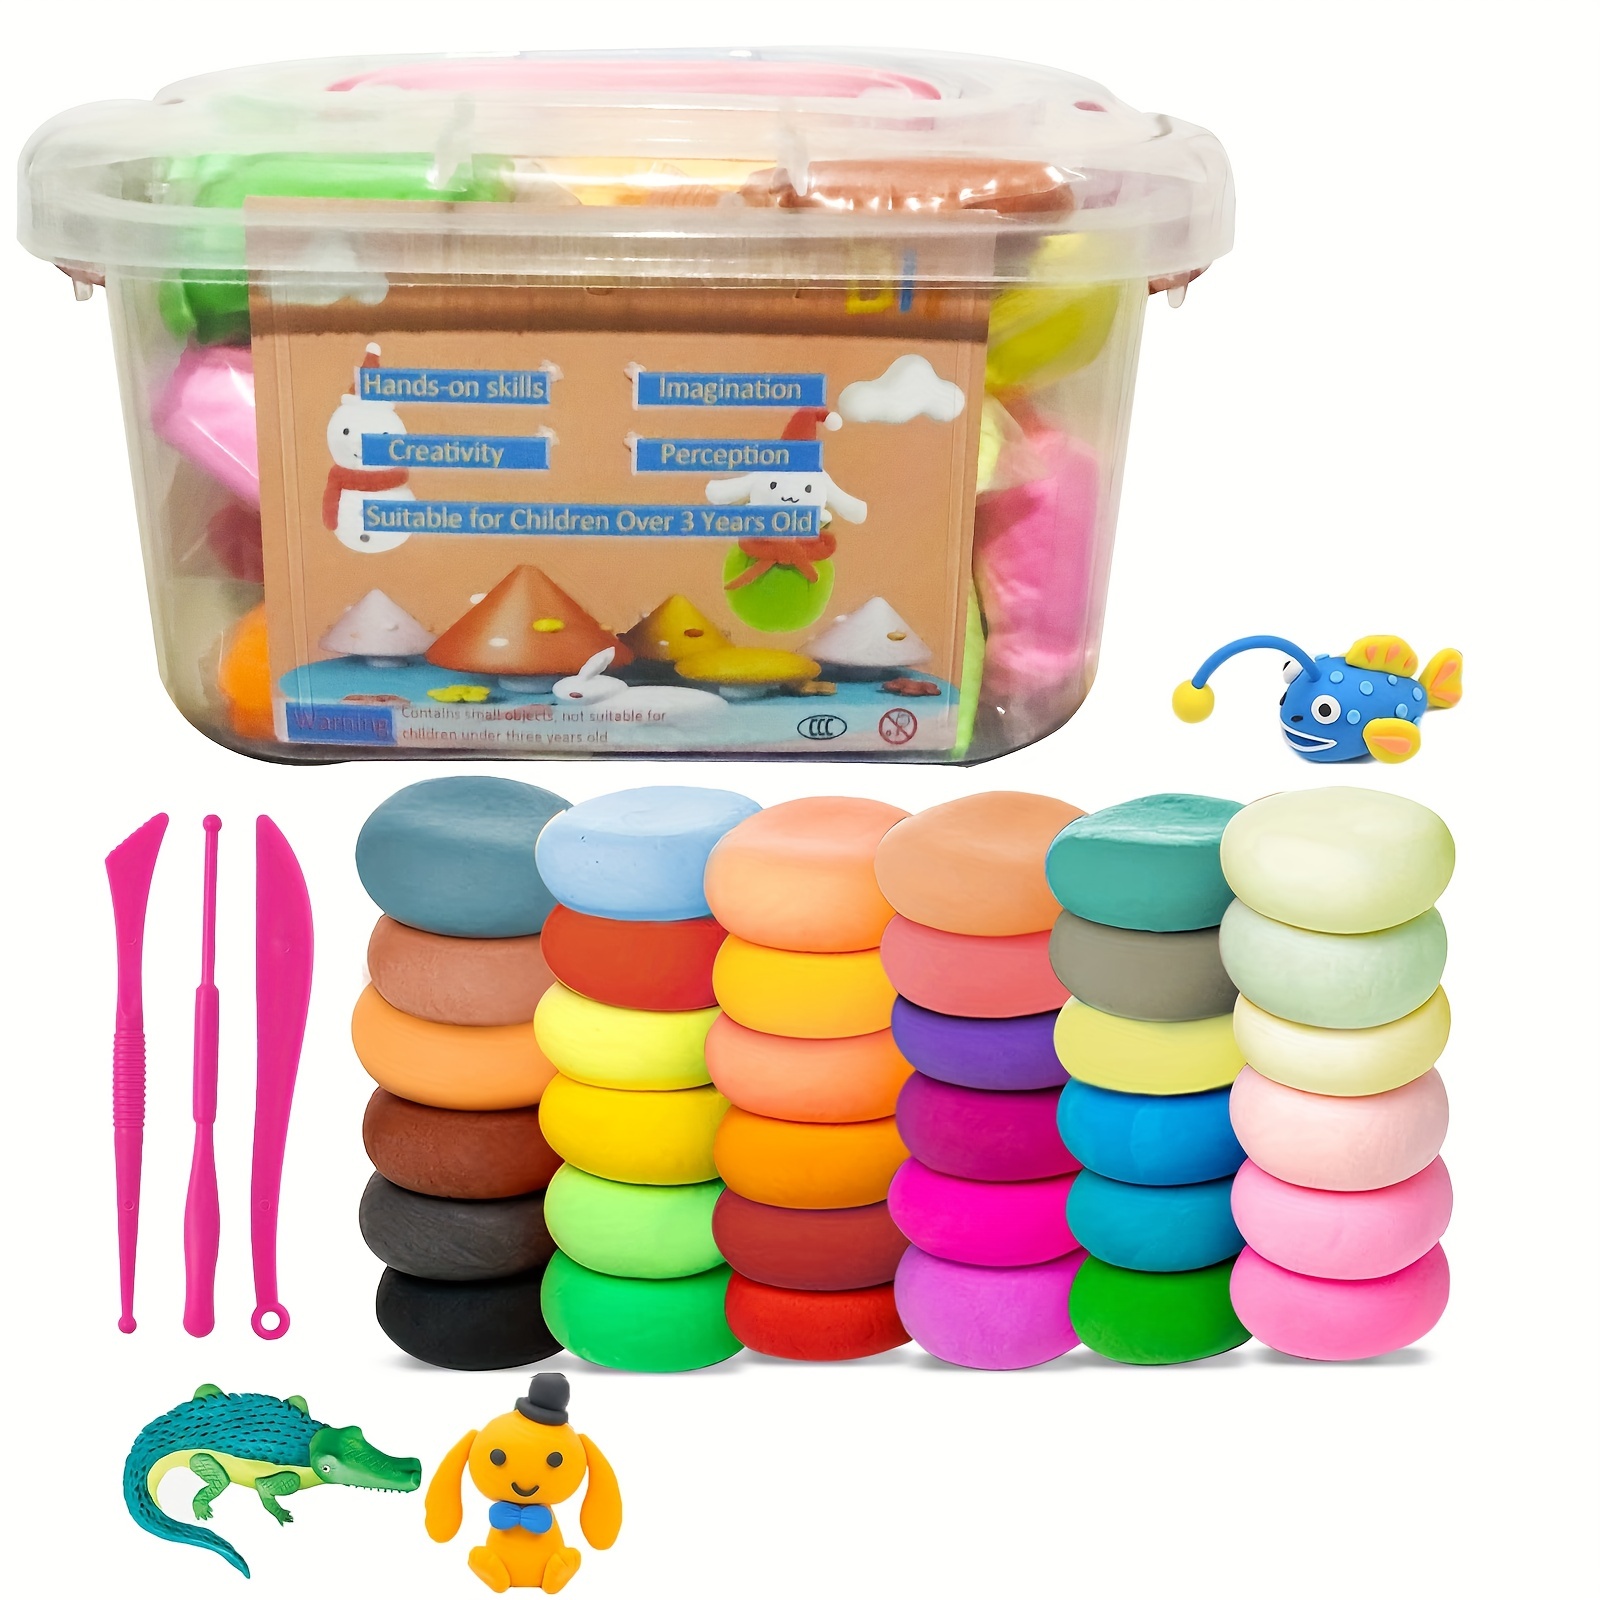 Original Stationery Mini World Food Air Dry Clay Kit with Modeling Clay for Sculpting in All The Colors You Need in This DIY Molding Clay for Kids